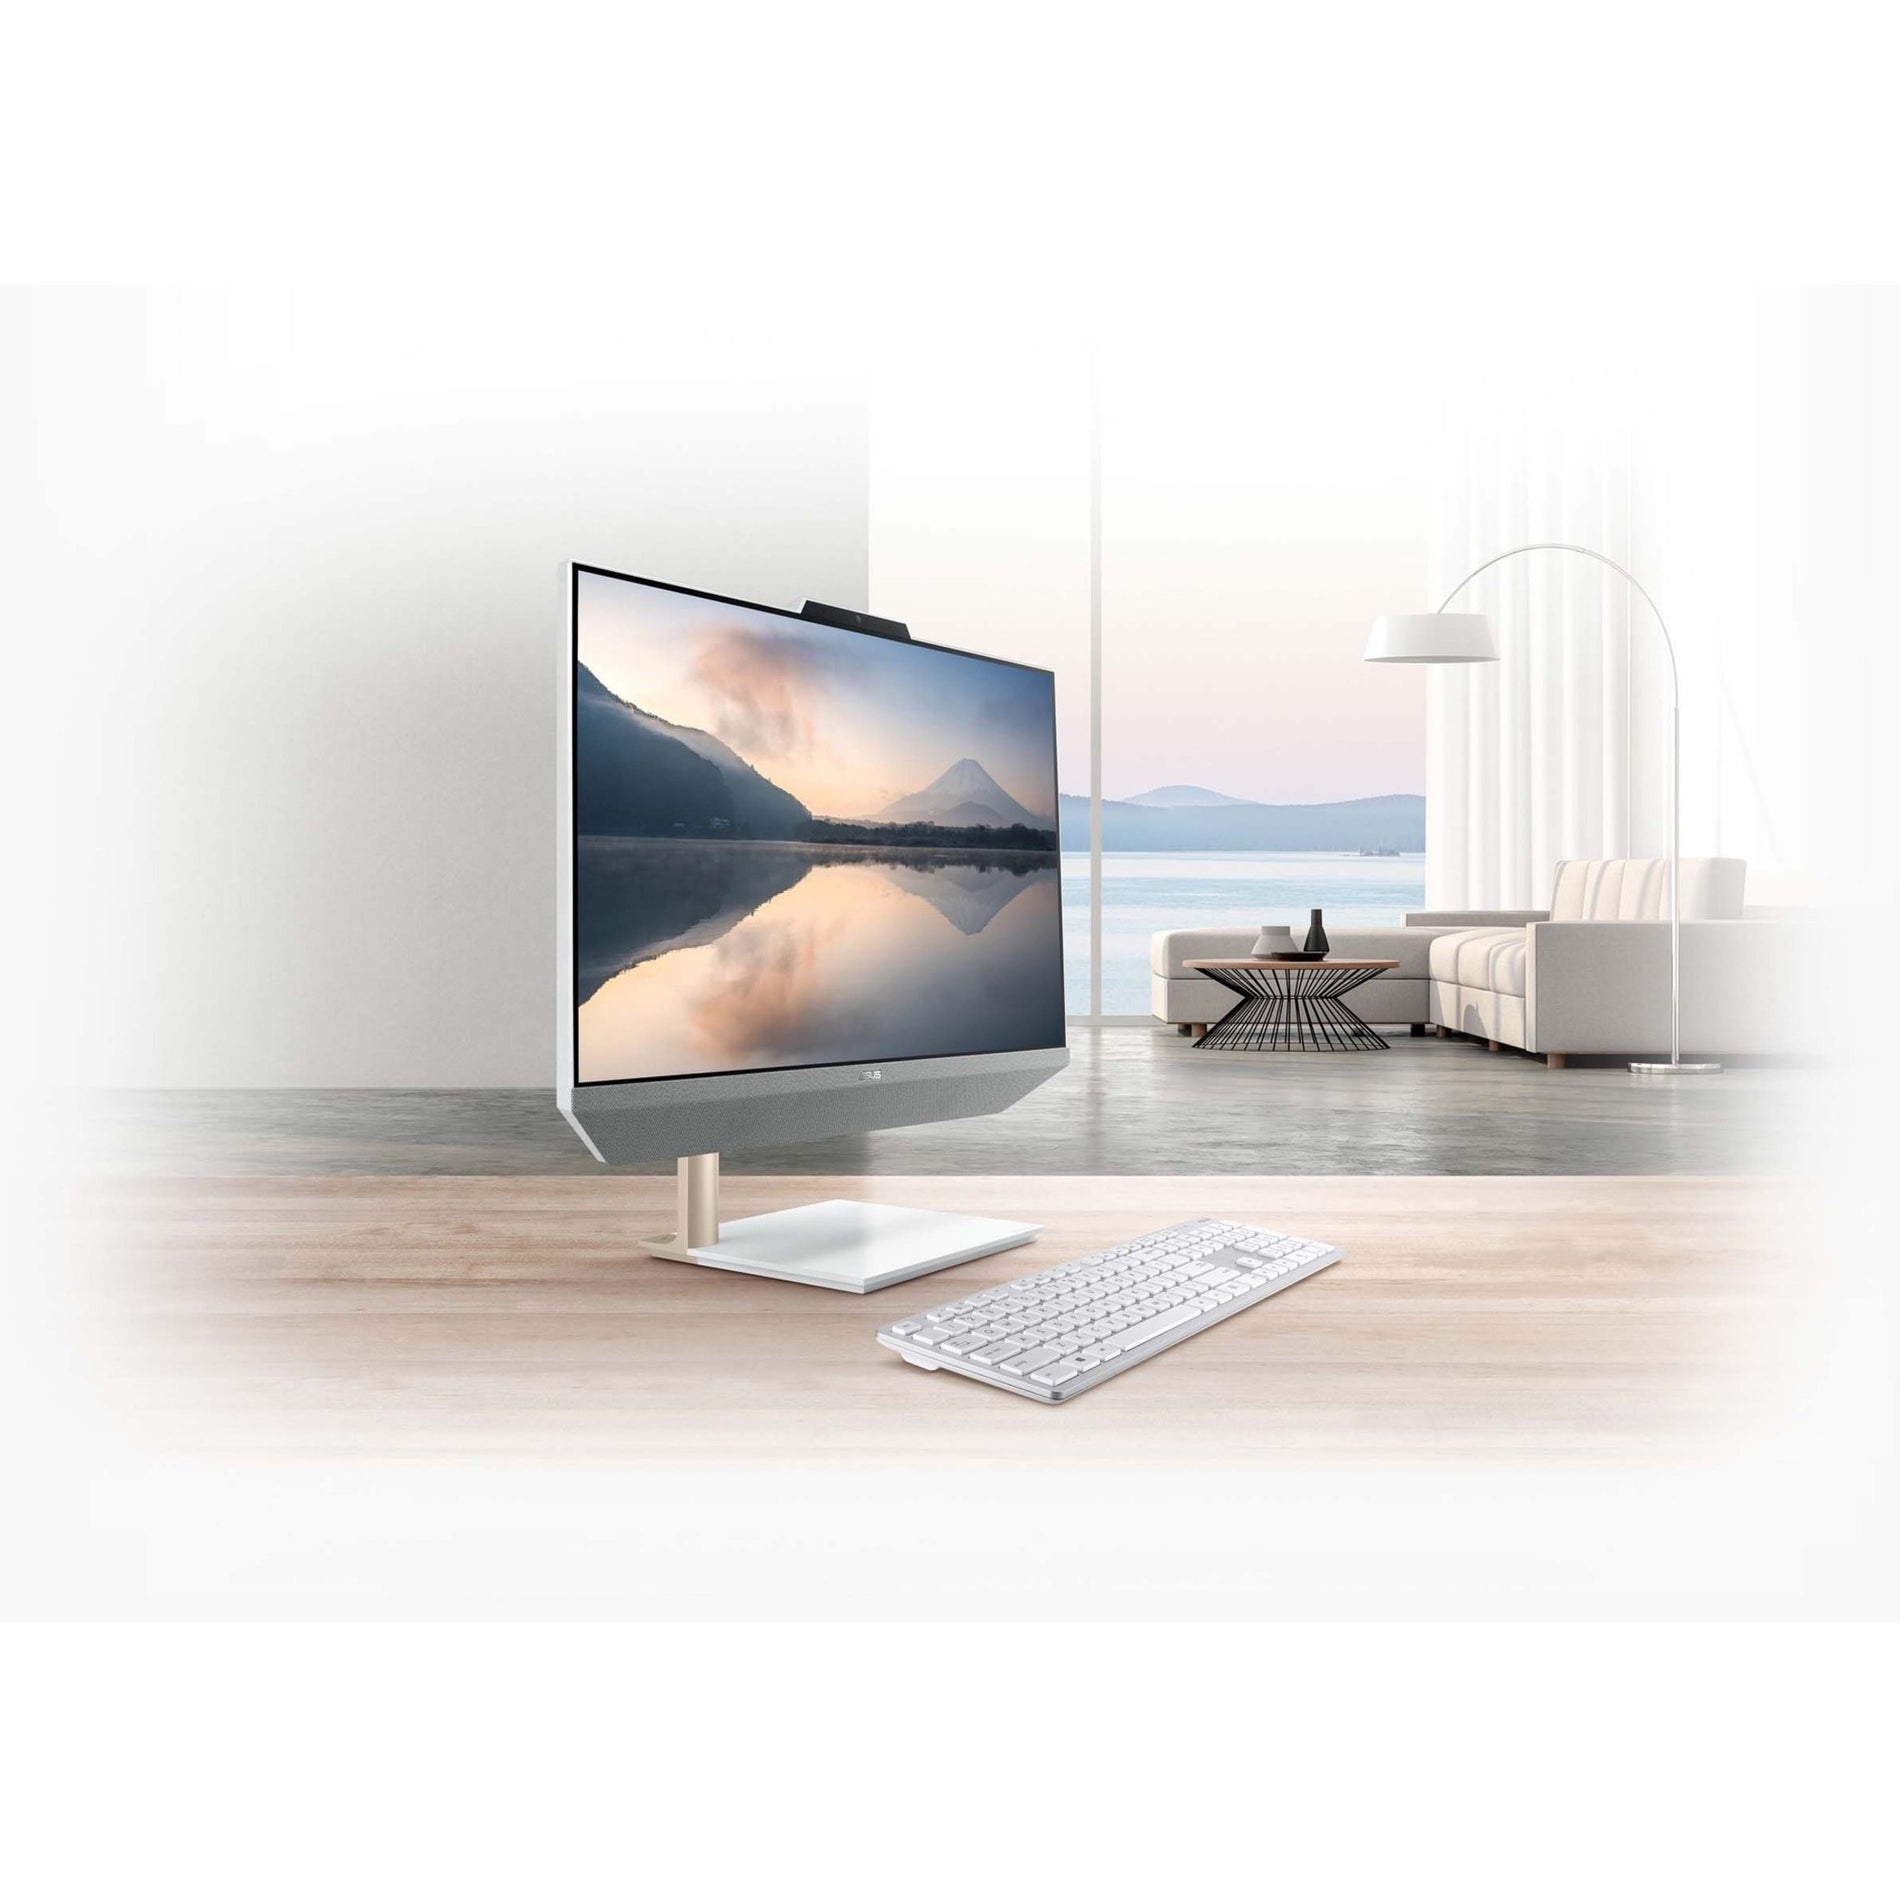 Asus M5401WUA-DS503T Zen AiO All-in-One Computer, Ryzen 5, 8GB RAM, 512GB SSD, 23.8" Touchscreen Display, White